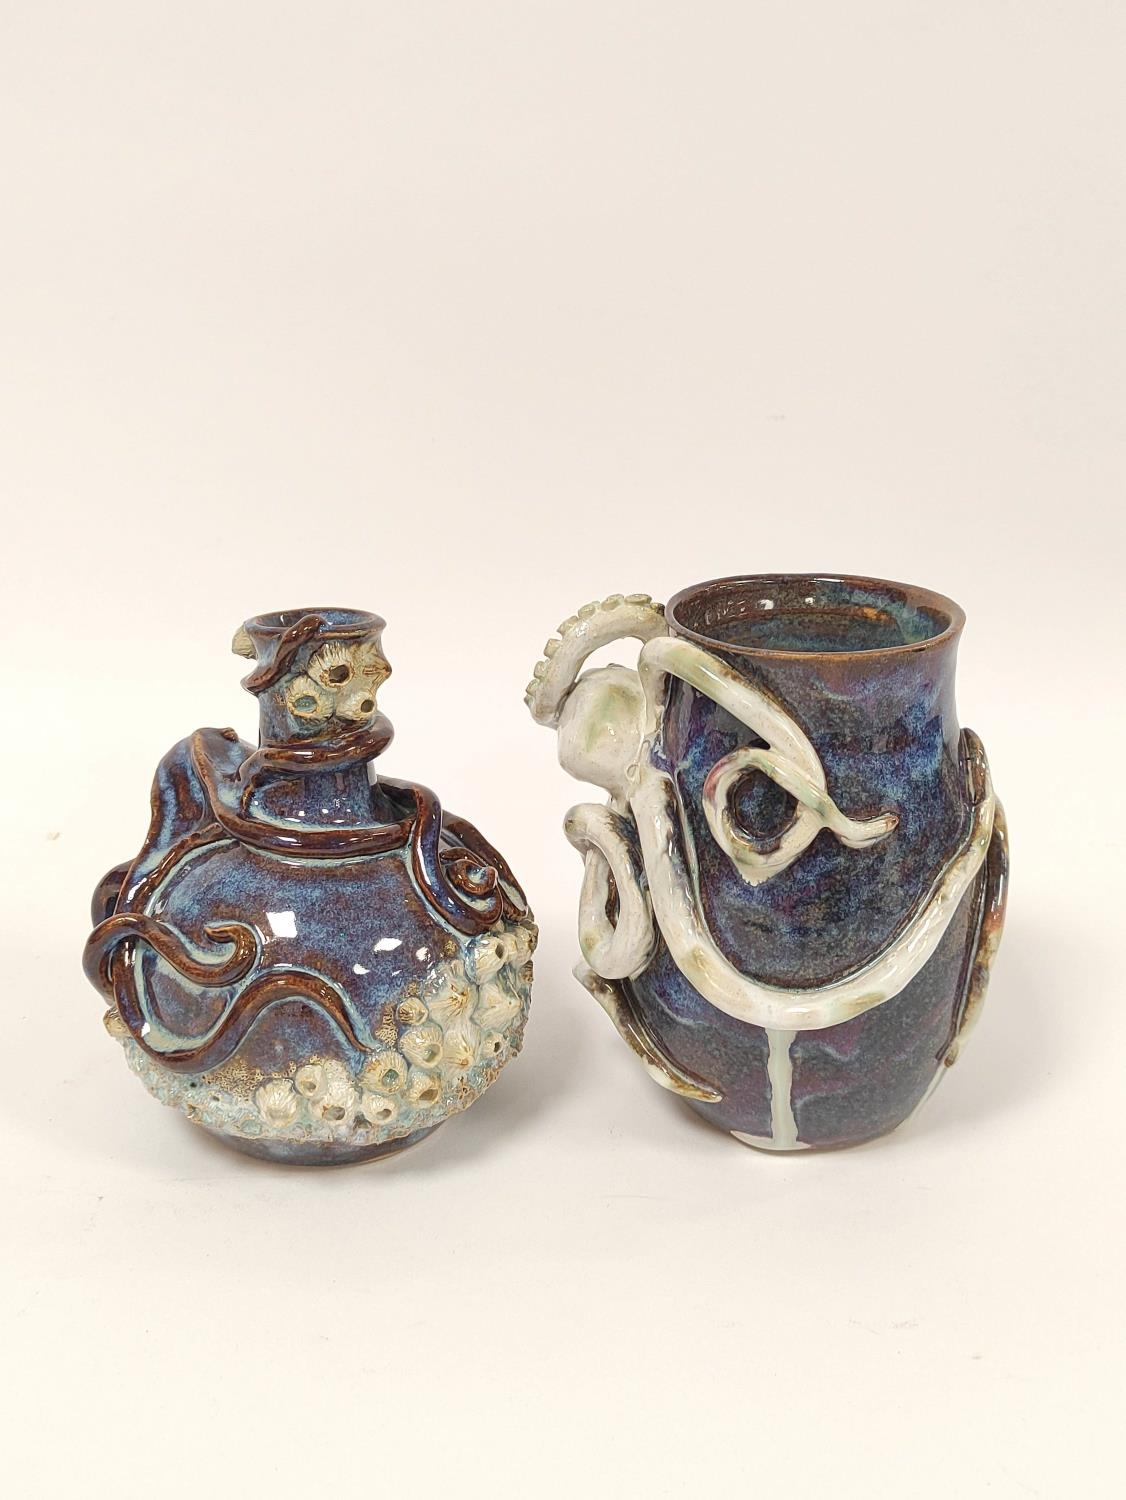 Two Studio pottery vases (Hexham?) each decorated with moulded octopus, drip glazed in blue,